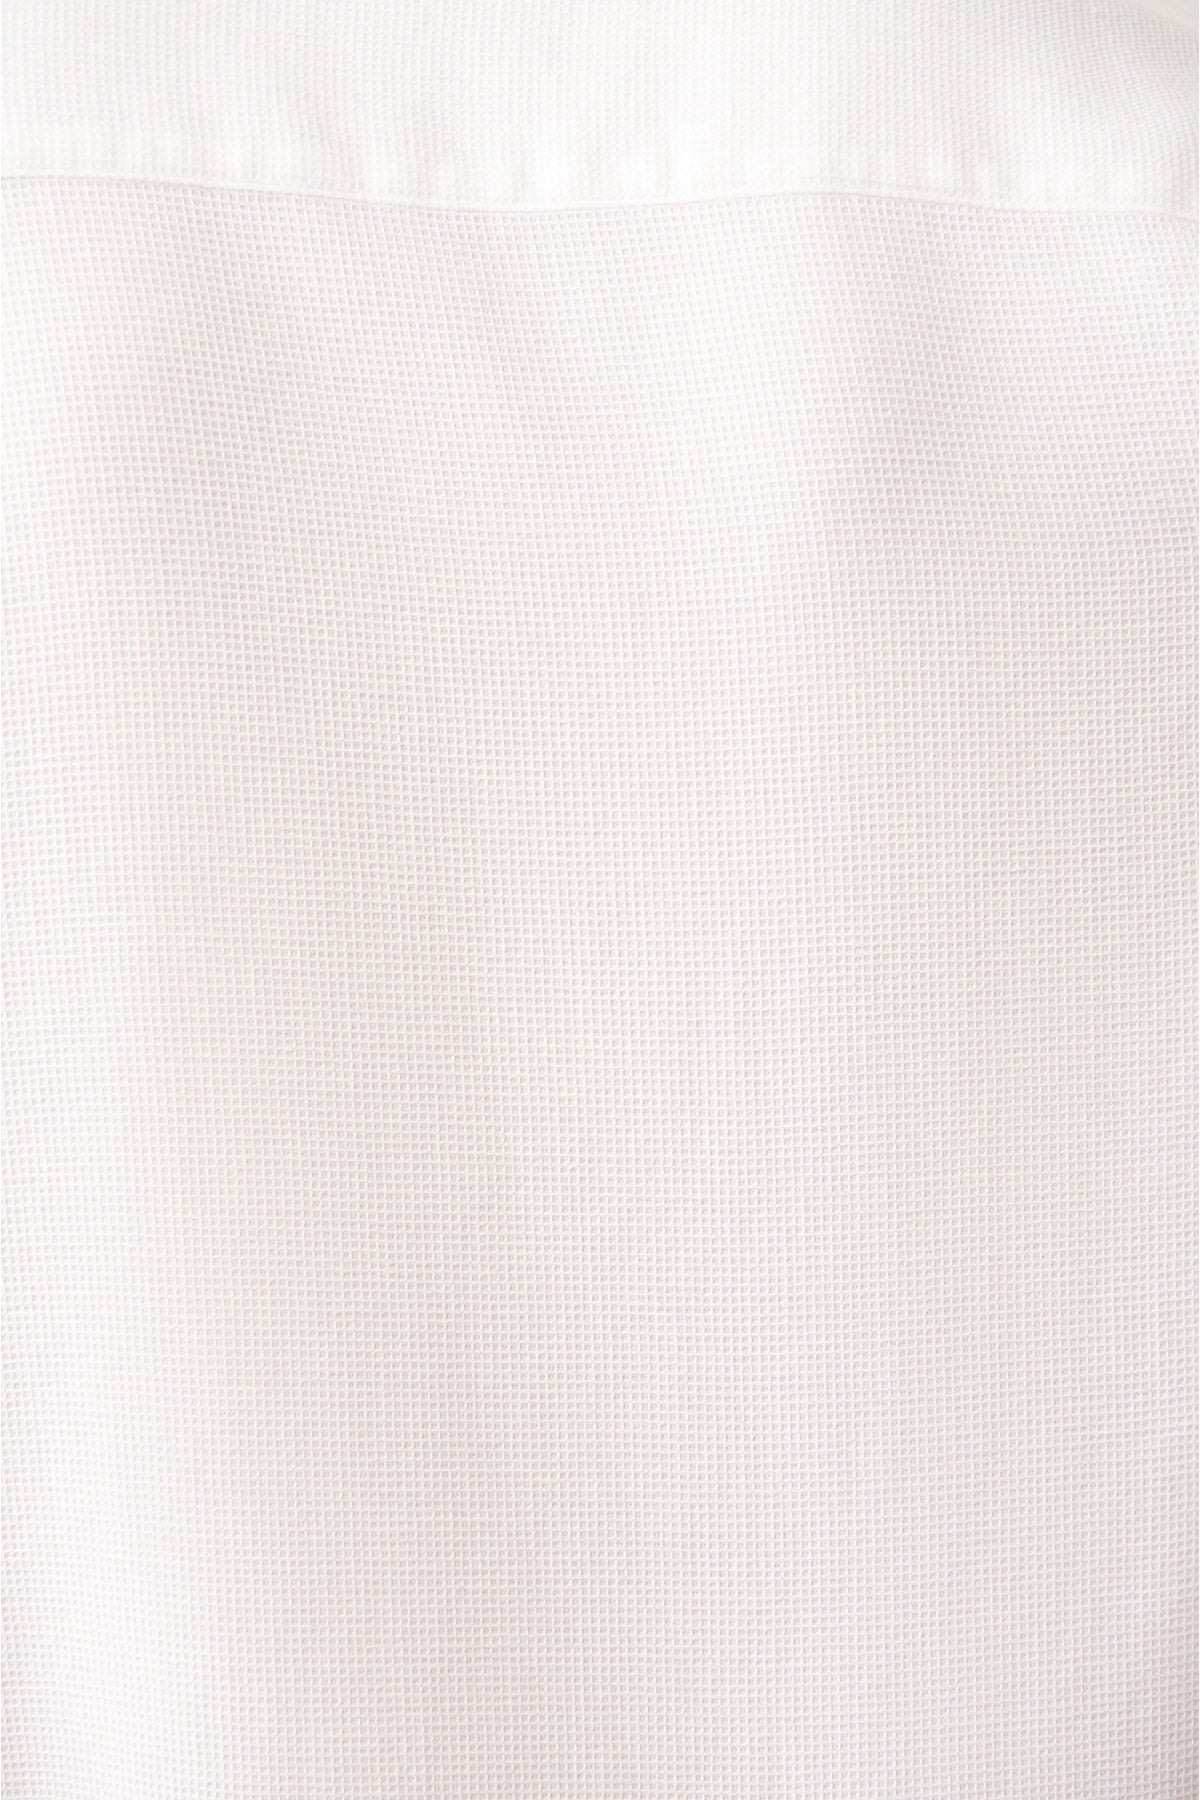 100 %Cotton Regular Fit Shirt with Men's White Pocket A31y2005